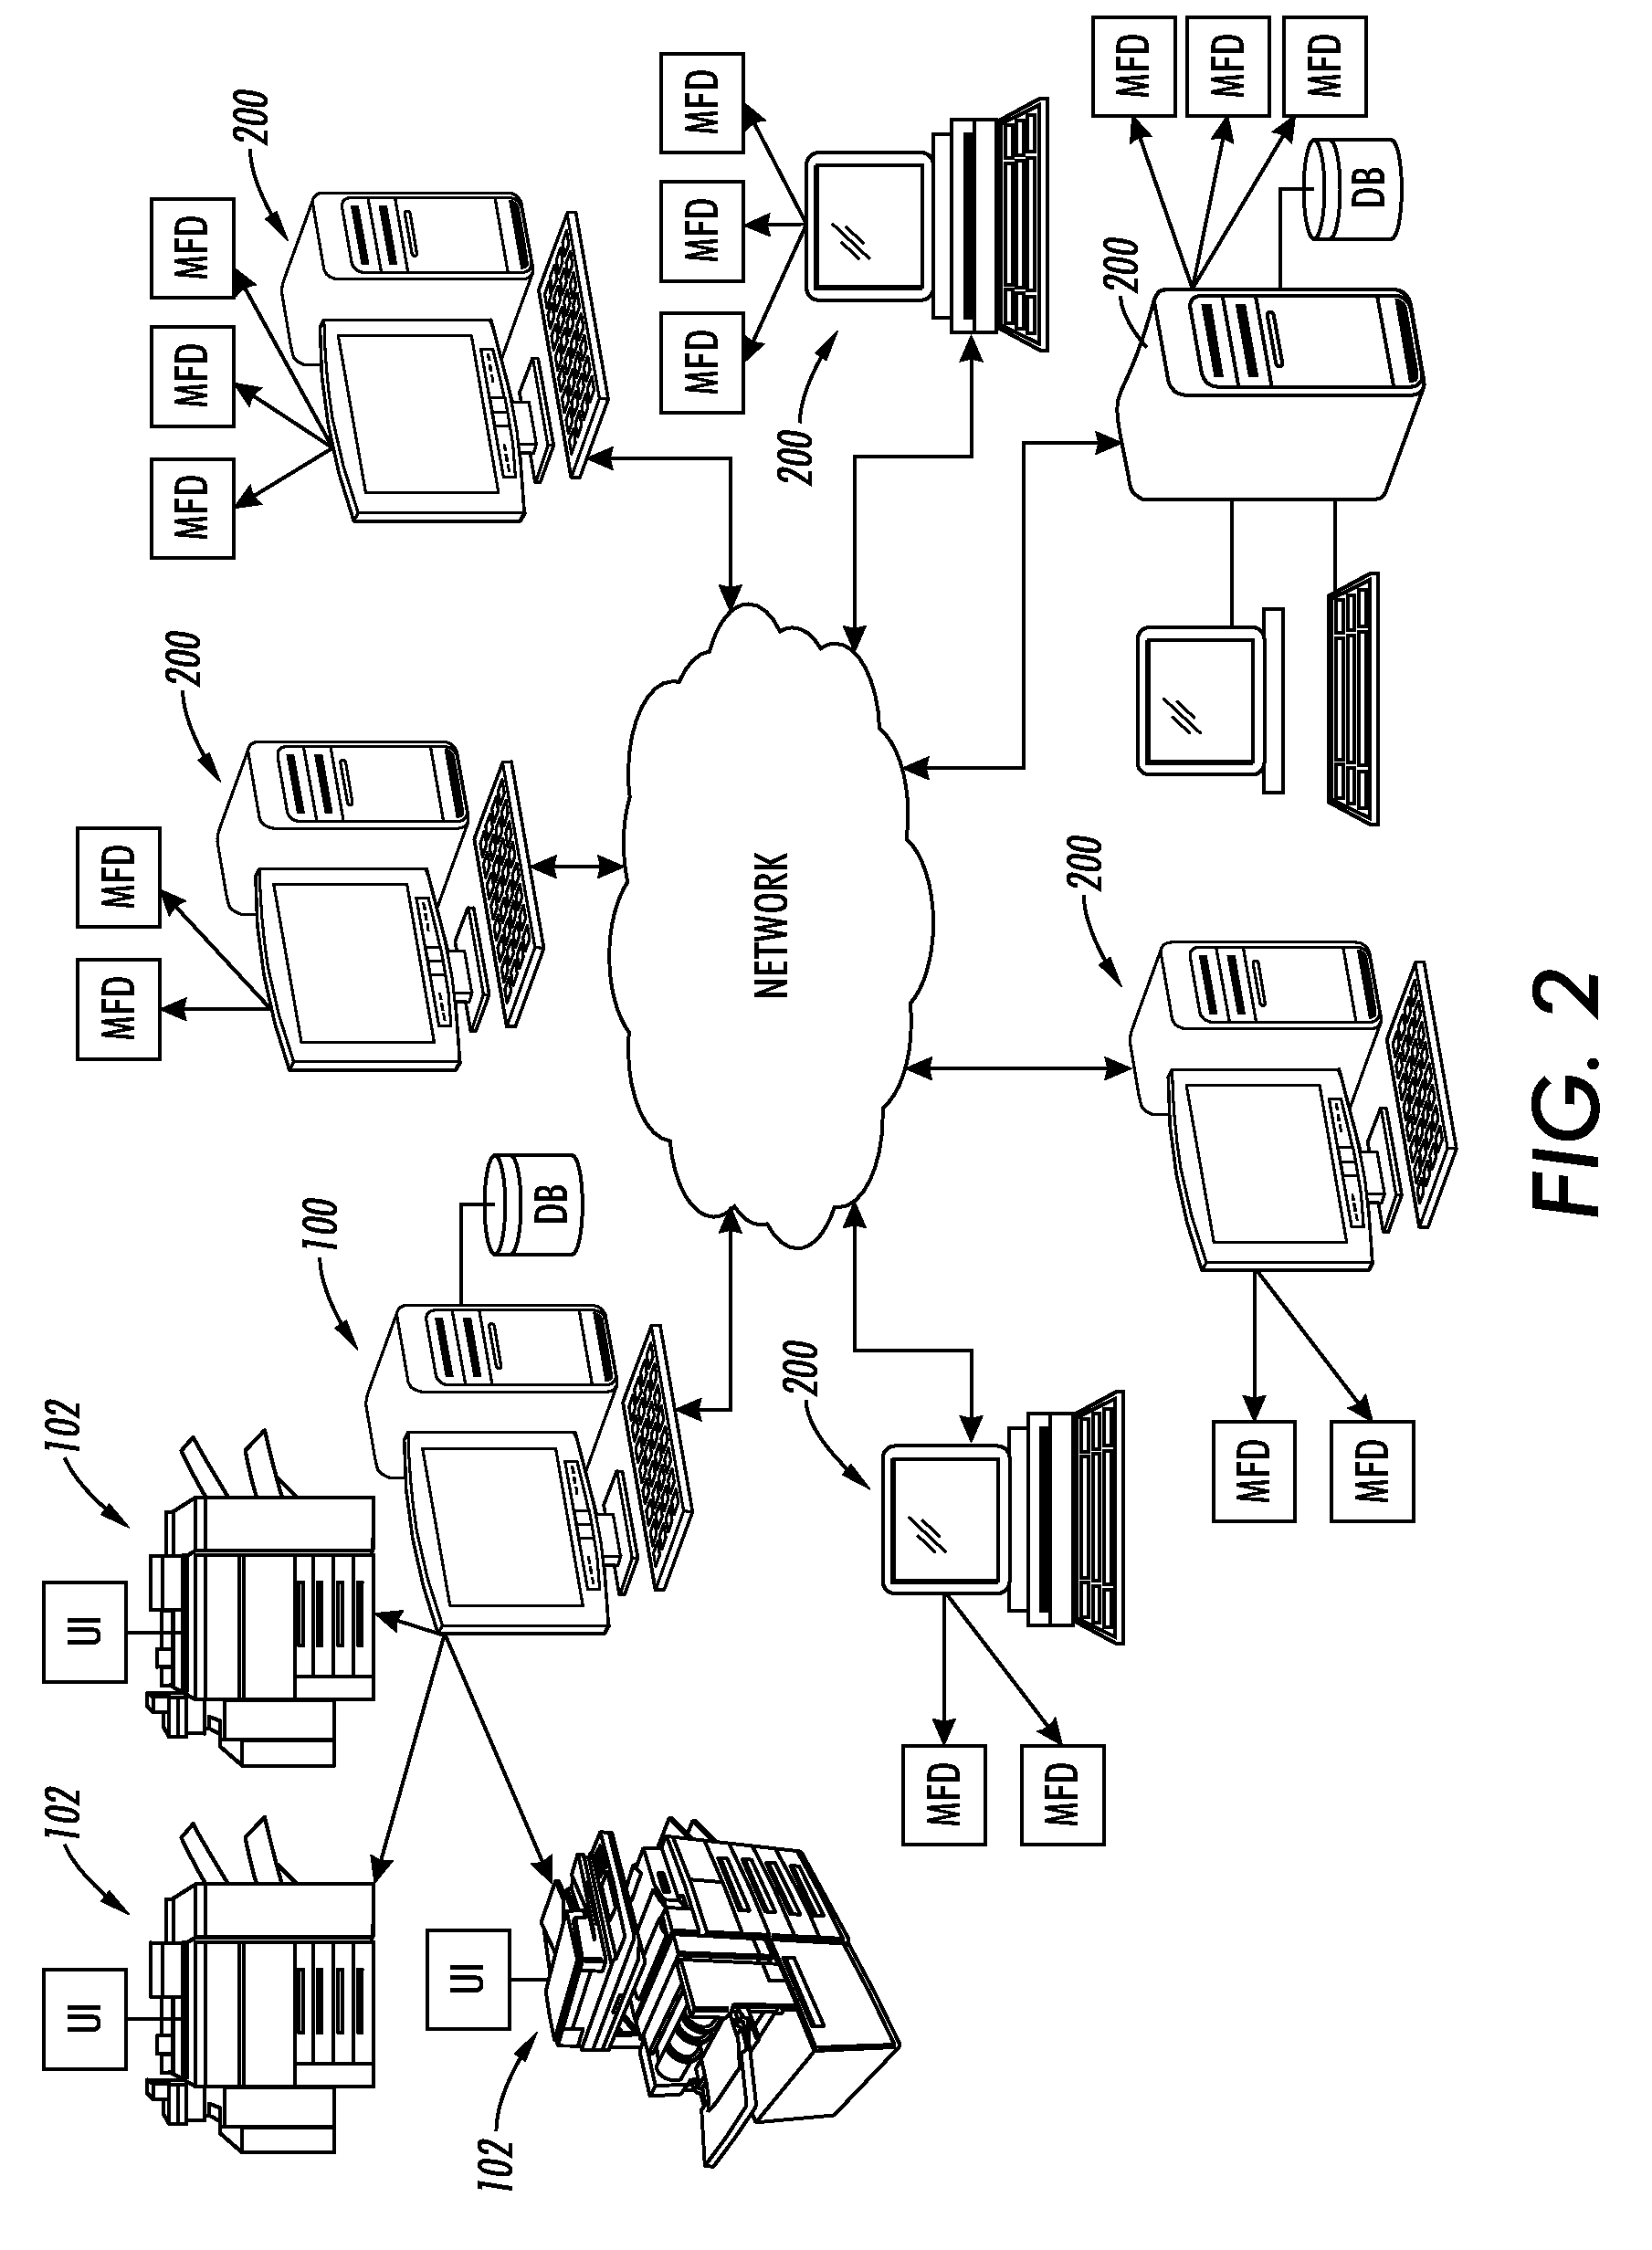 Sharing service applications across multi-function devices in a peer-aware network